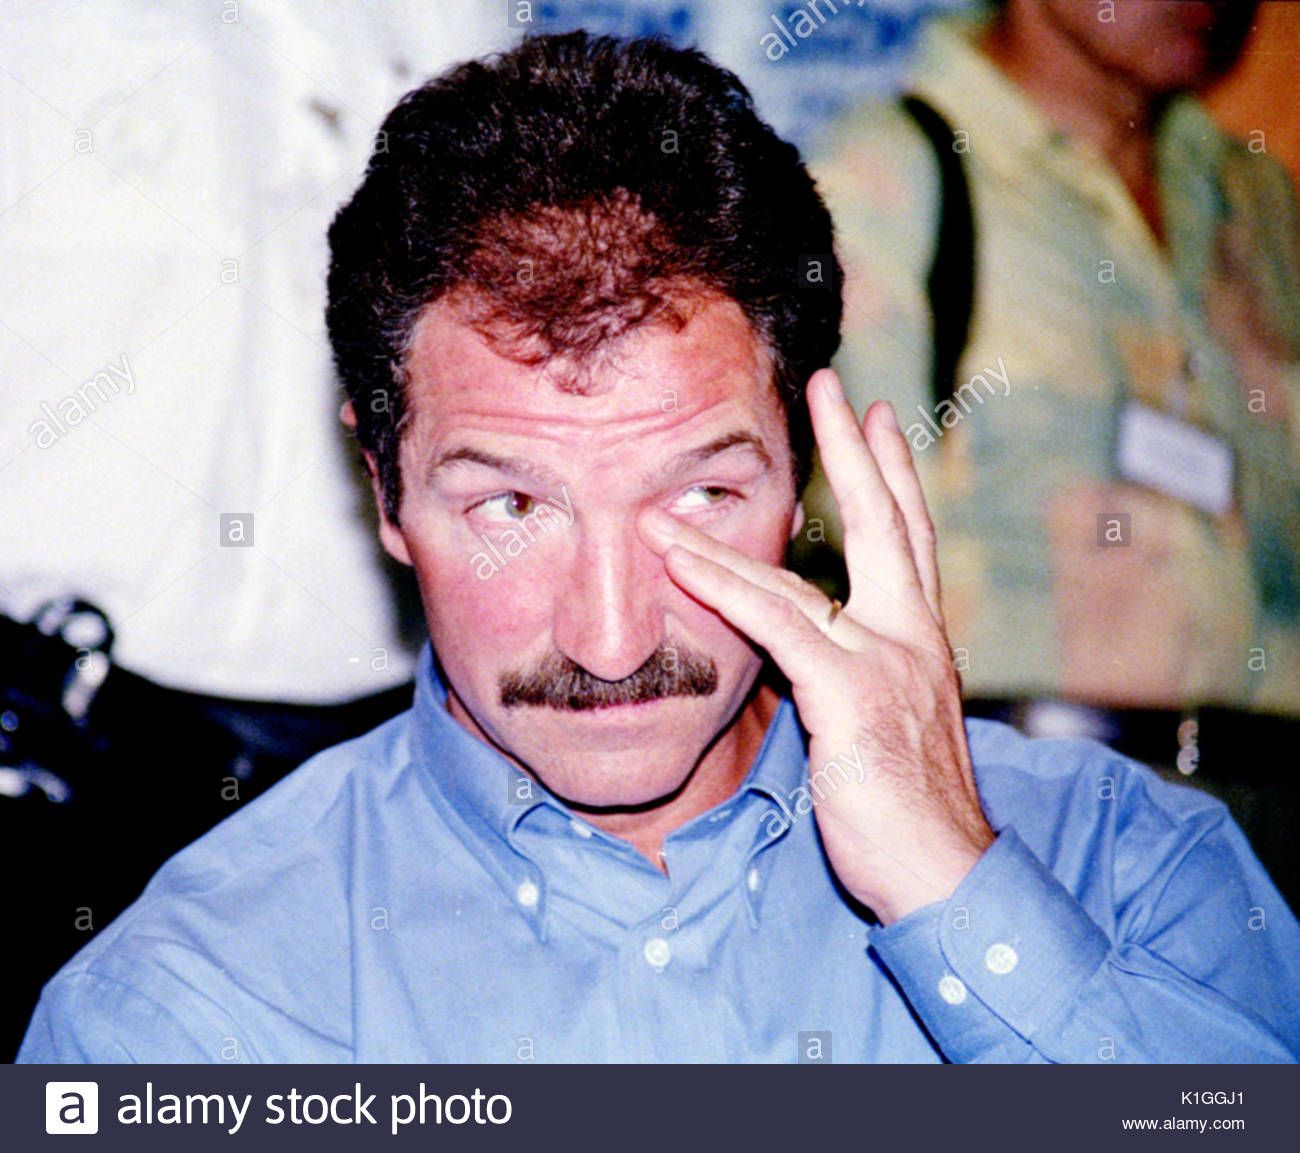 scotsman-graeme-souness-is-appointed-manager-of-torino-fc-in-italy-K1GGJ1.jpg